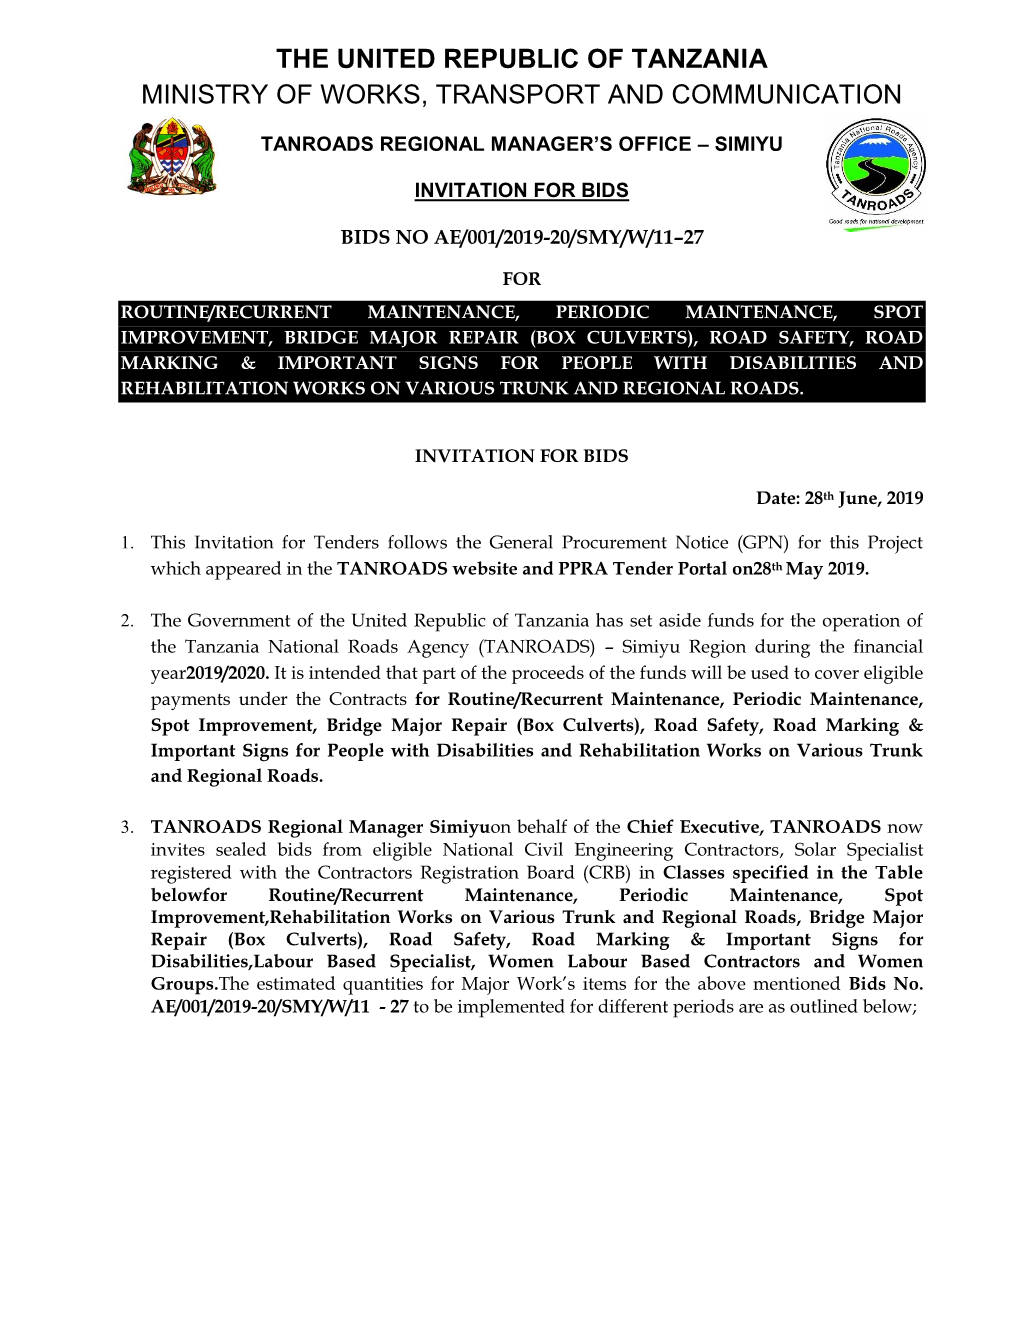 The United Republic of Tanzania Ministry of Works, Transport and Communication